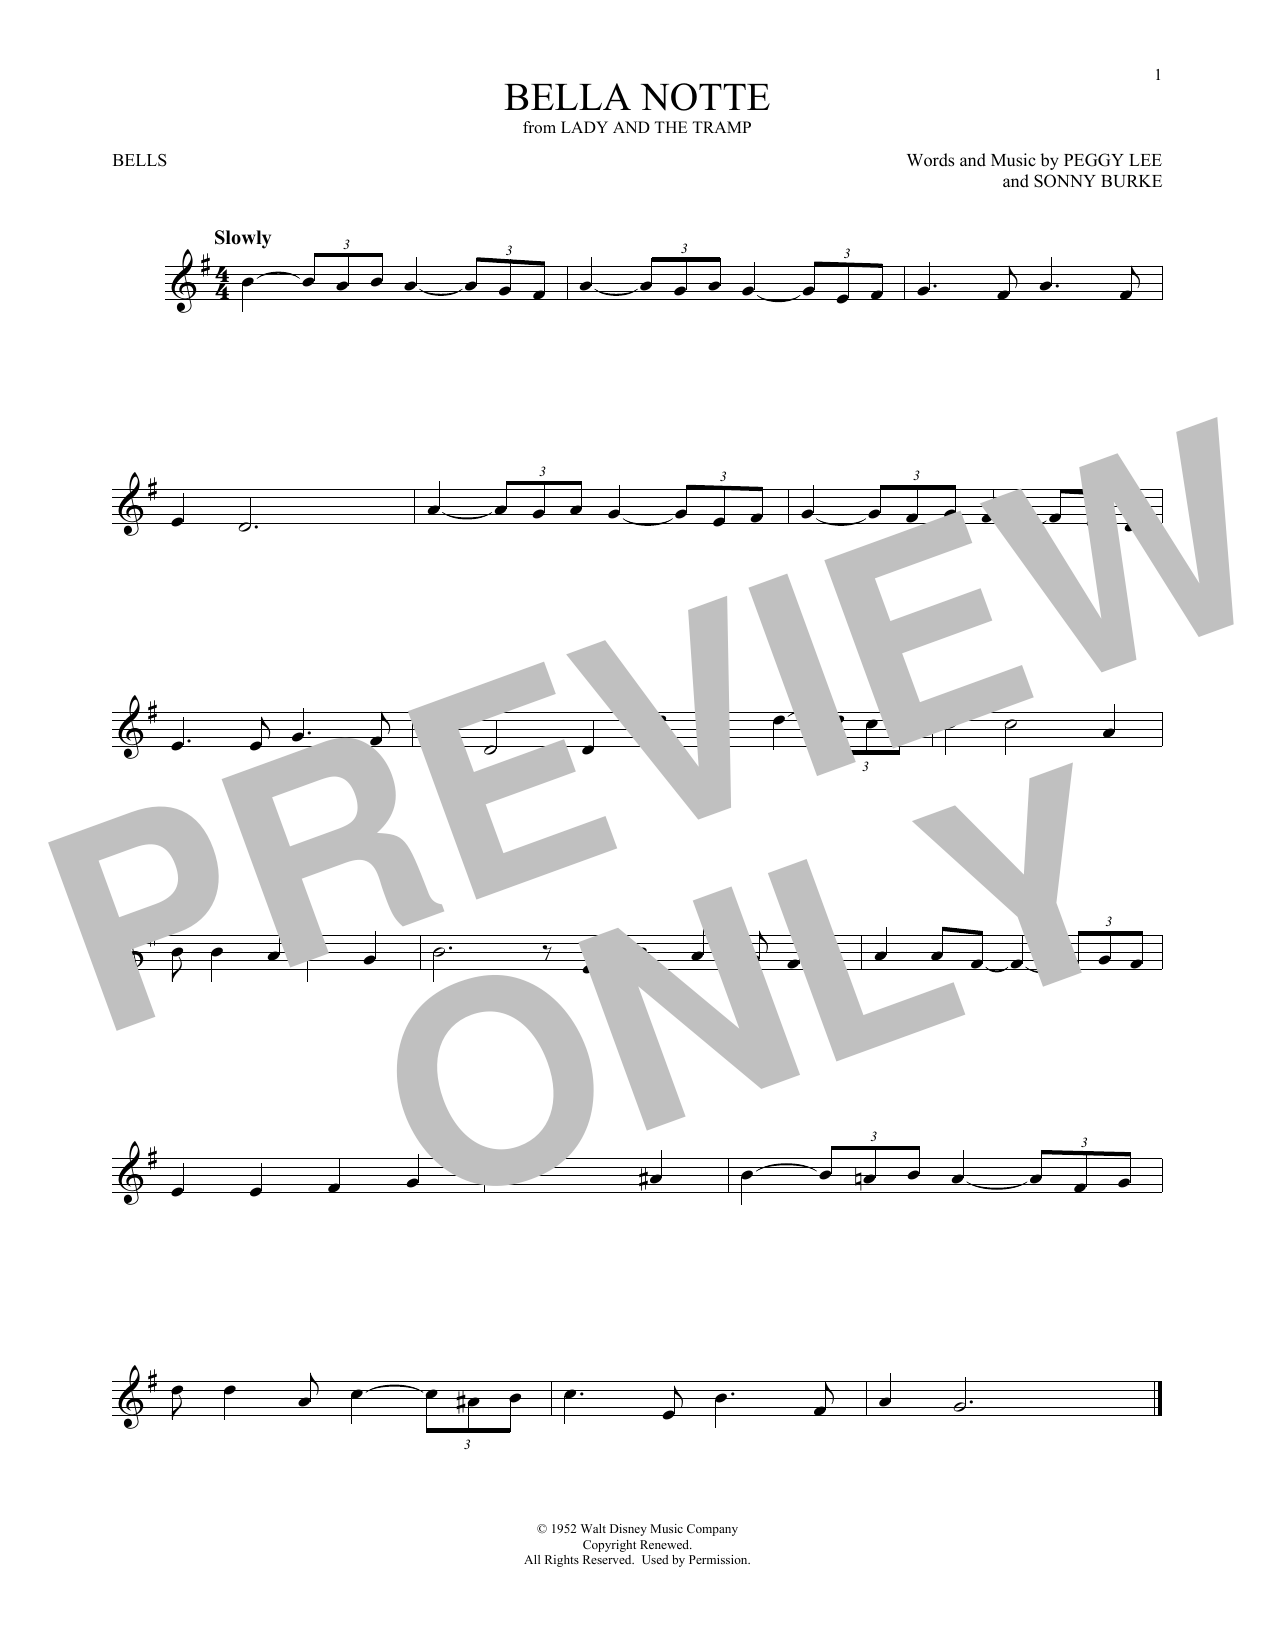 Download Peggy Lee Bella Notte (from Lady And The Tramp) Sheet Music